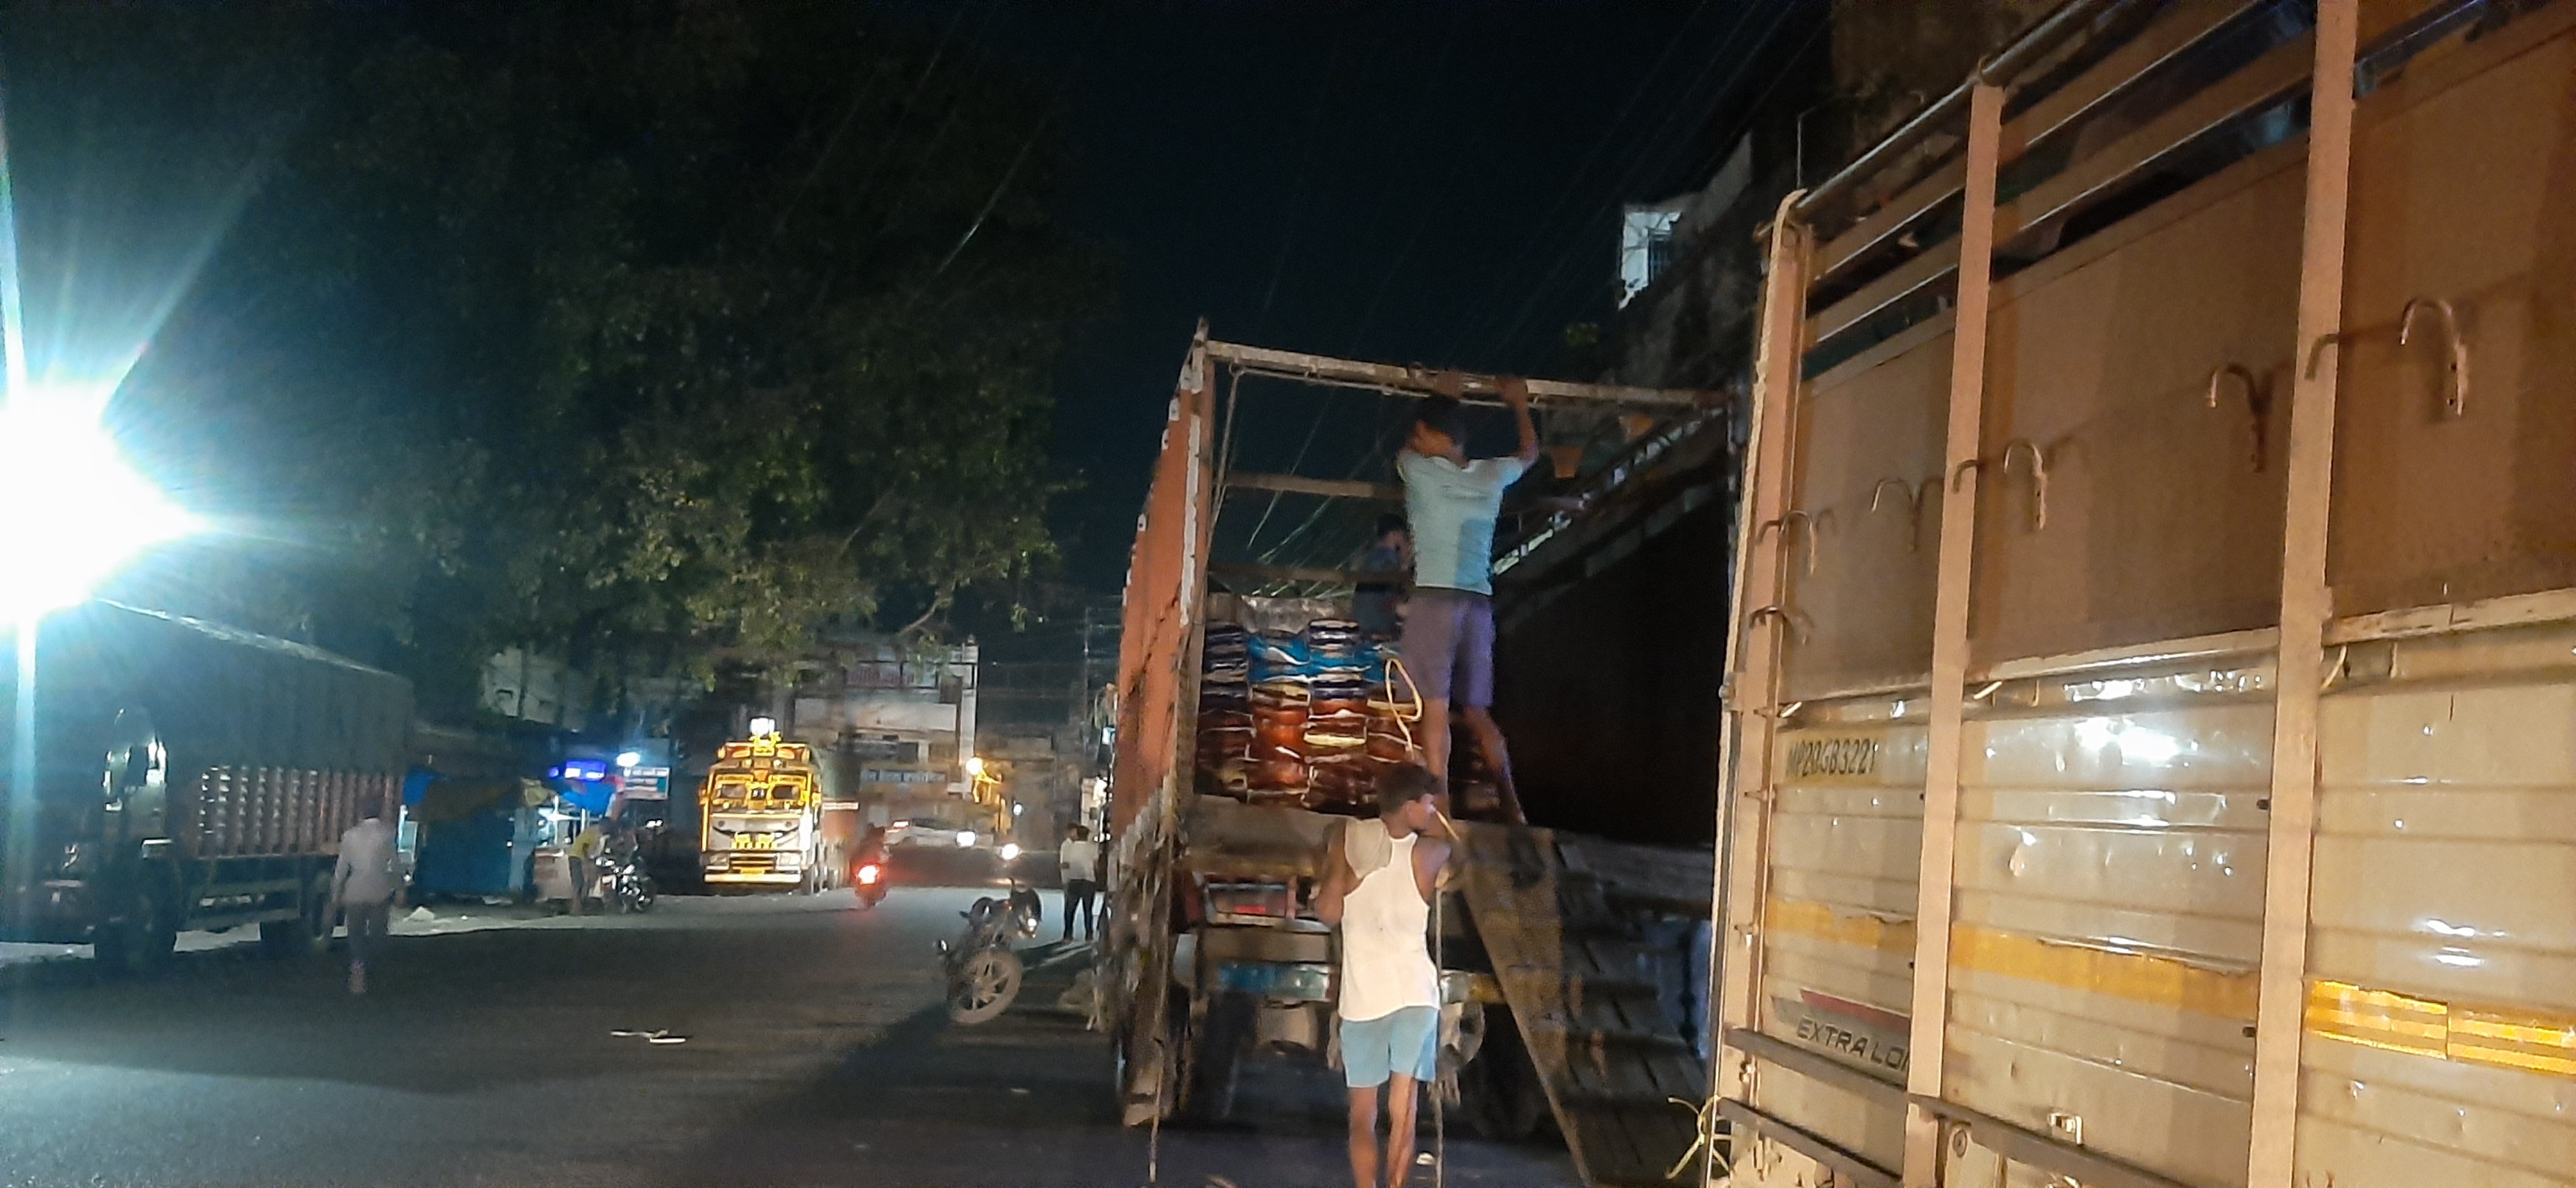 As soon as night falls, the road of Nivadganj is becoming a warehouse